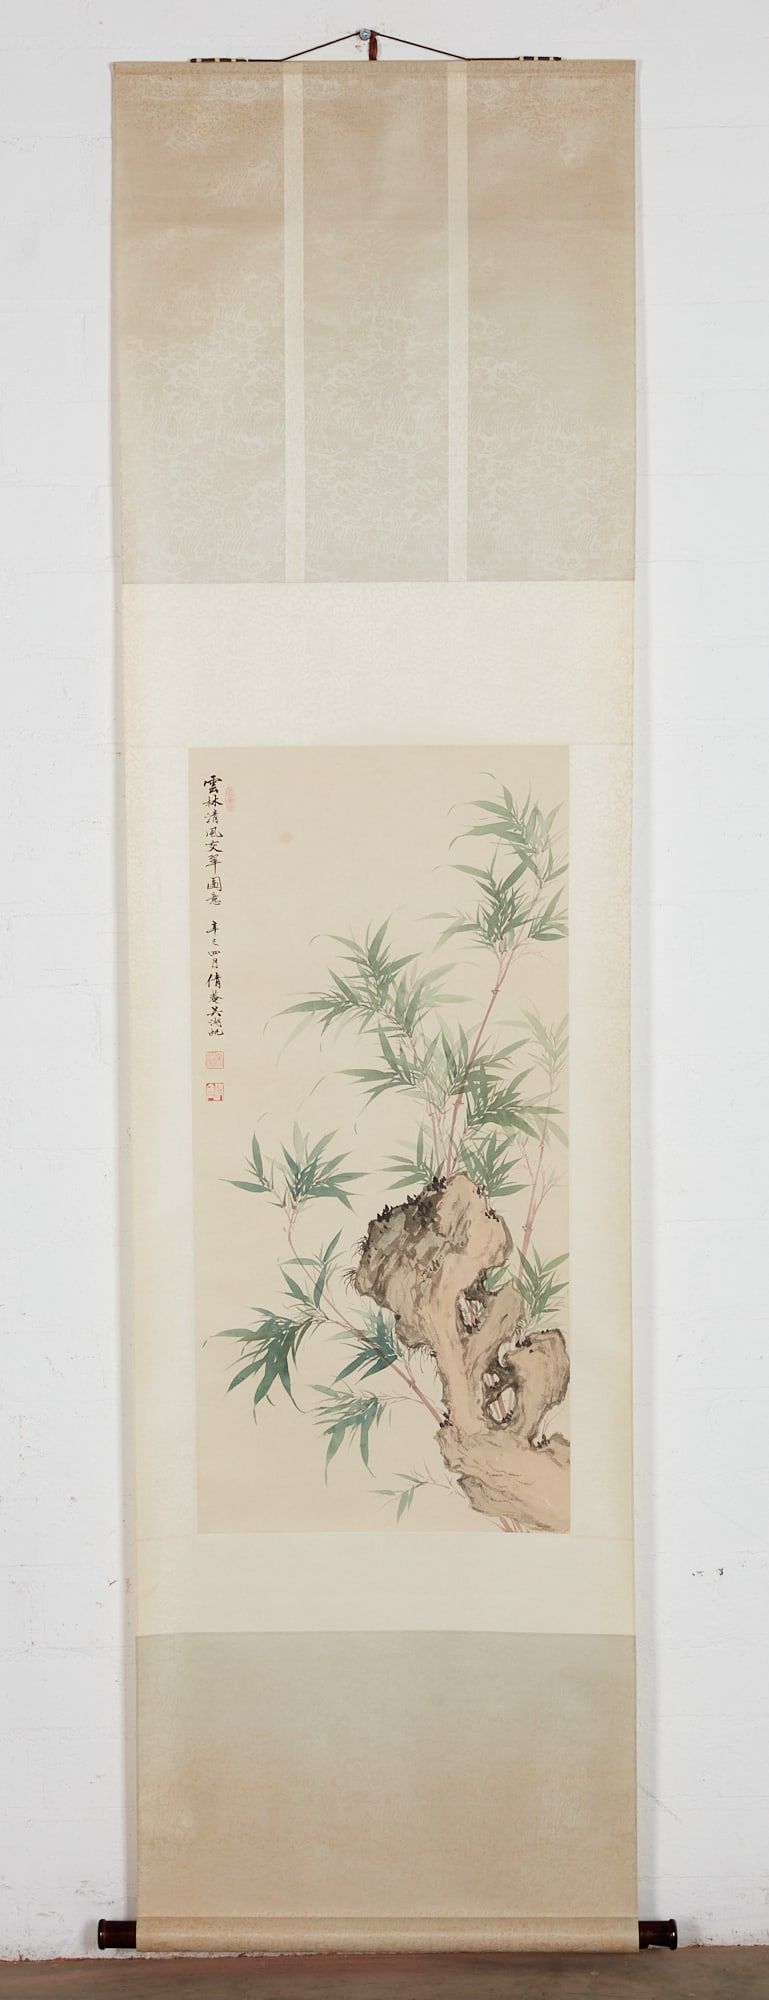 A CHINESE SCROLL DEPICTING BAMBOO